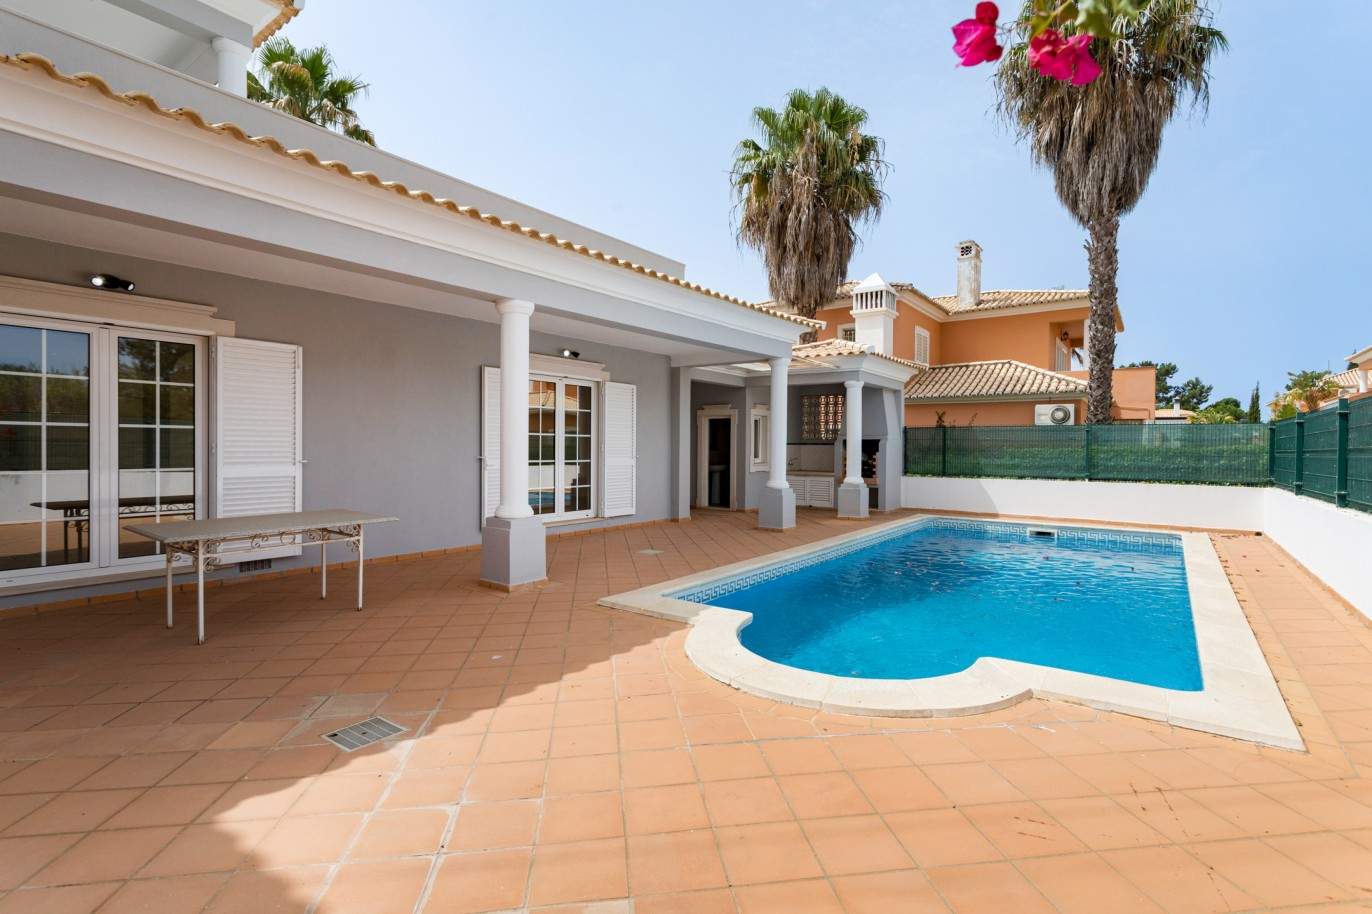 4 Bedroom Villa with swimming pool, for sale in Quarteira, Algarve_201732